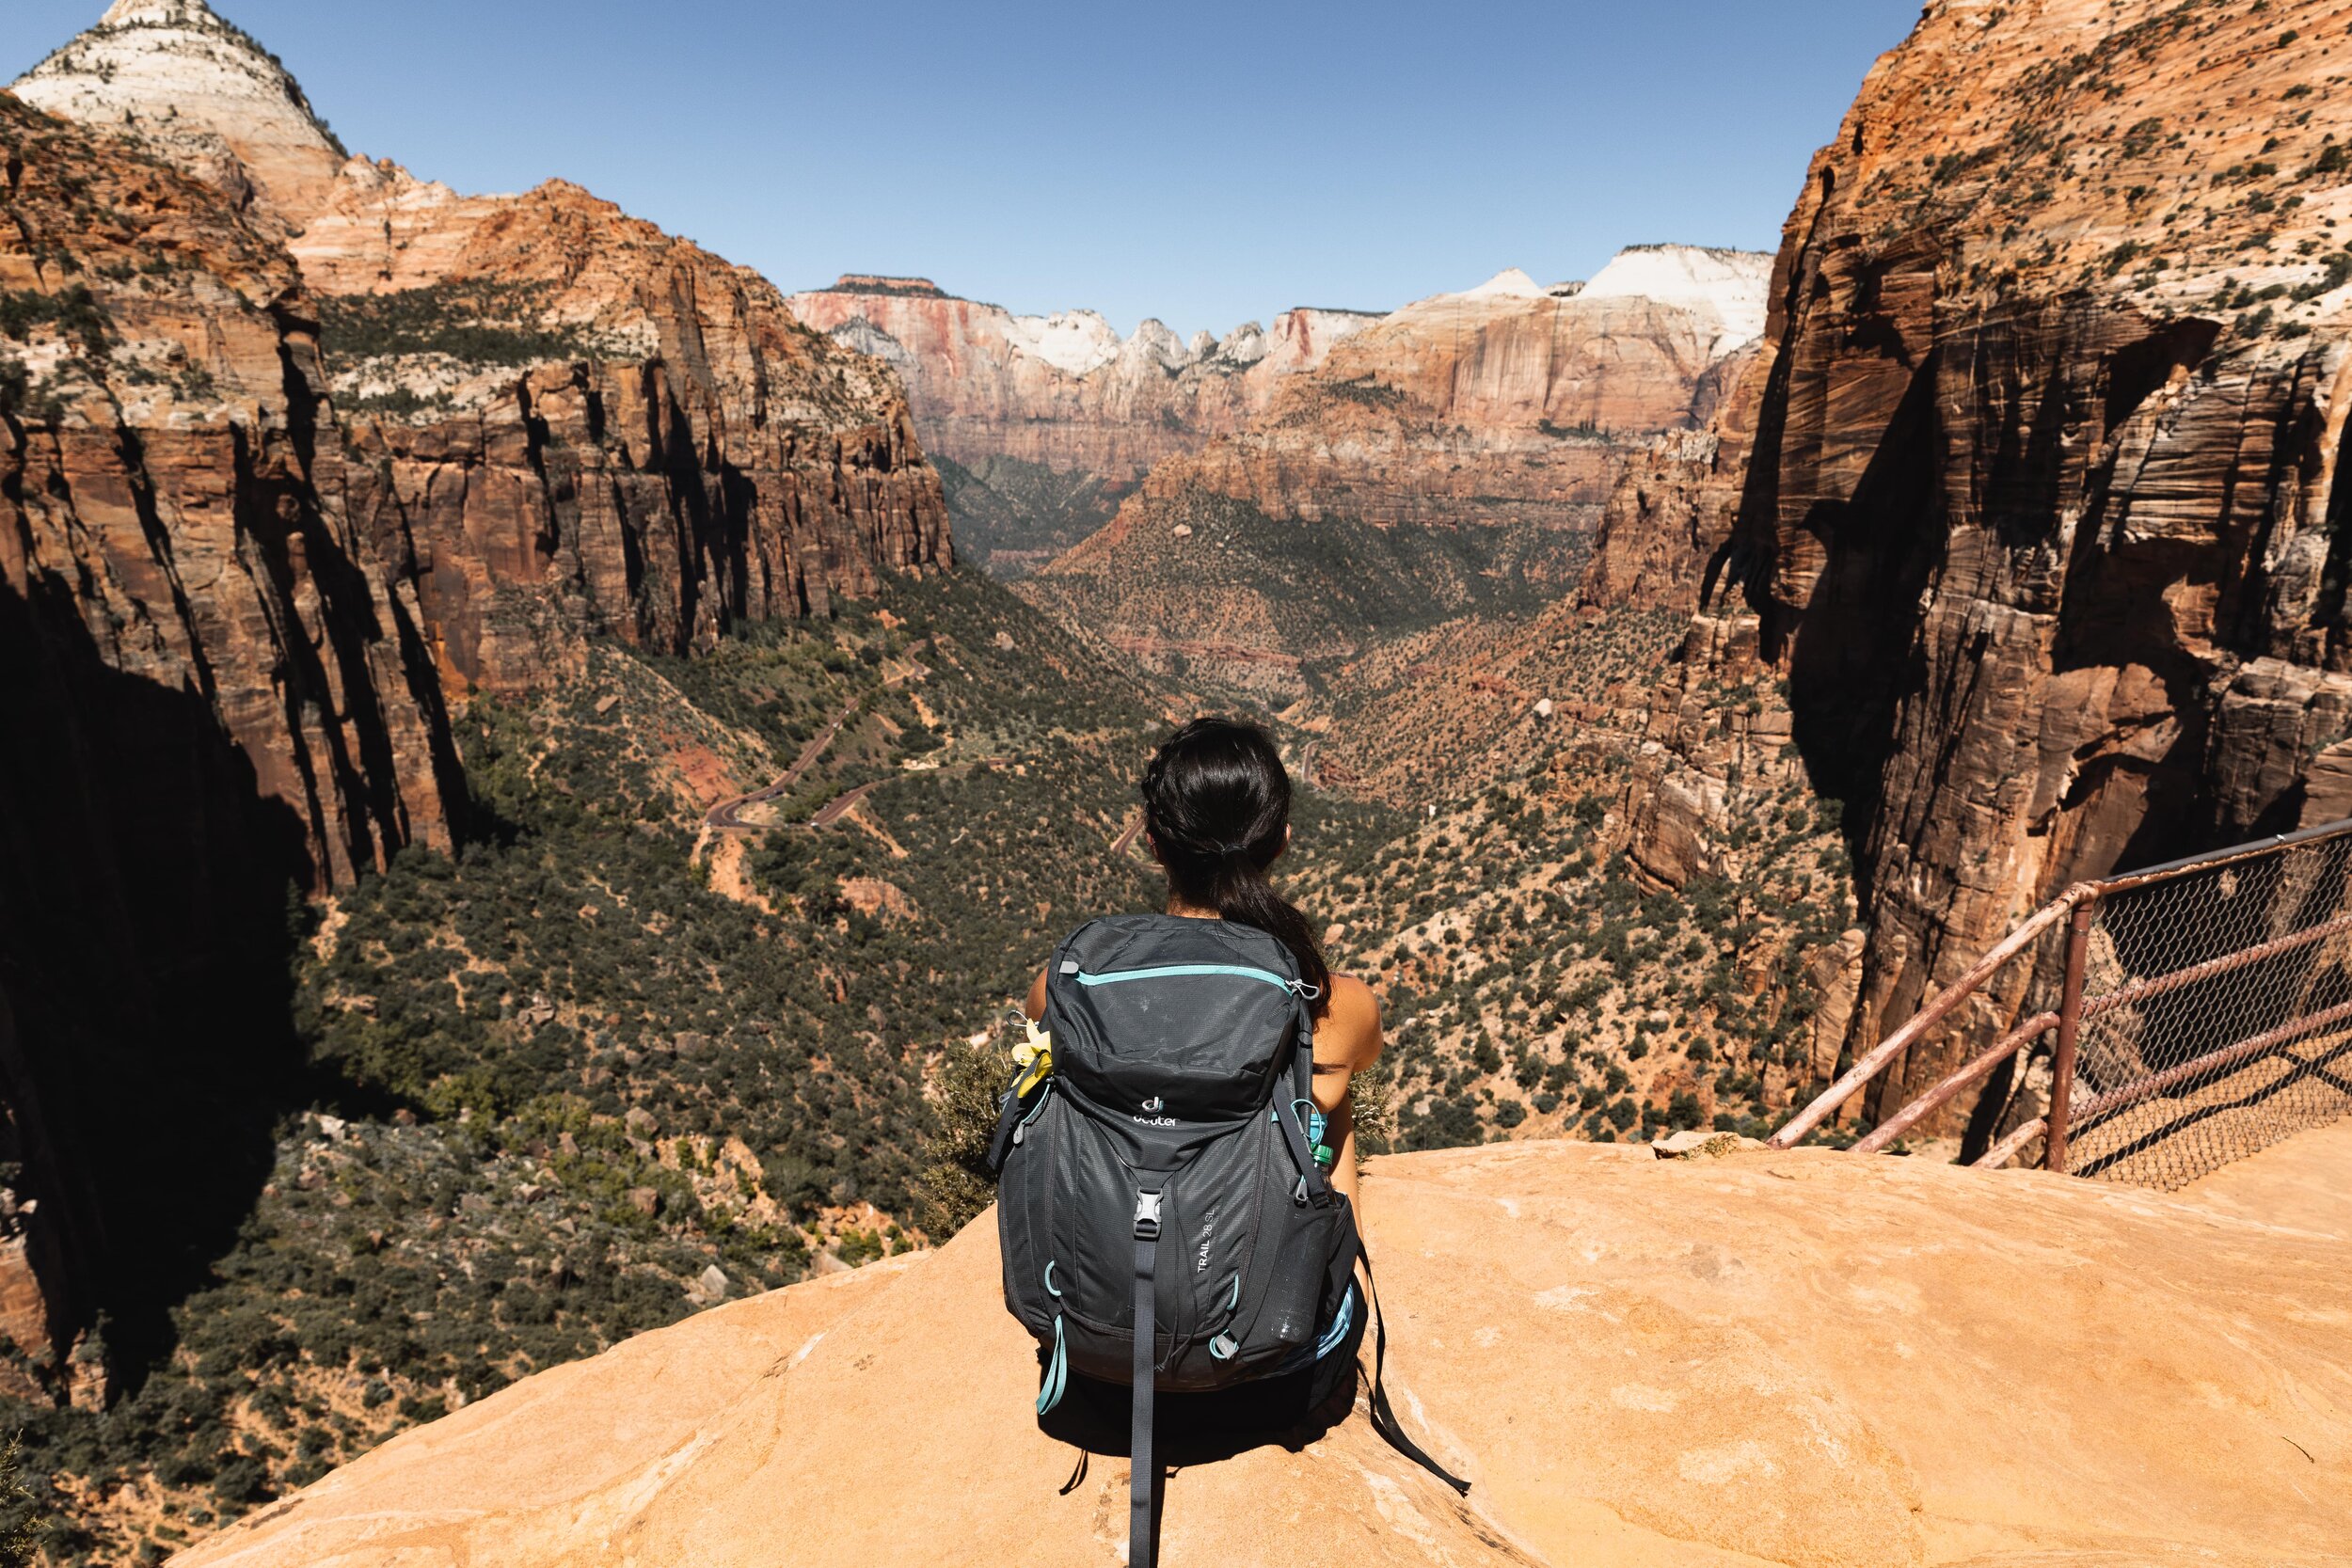 The kolob terrace road passes through some beautiful scenery as it ascends from the lower desert elevations to lava point (the . Zion National Park Itinerary 8 Best Things To Do In Zion National Park Nichole The Nomad